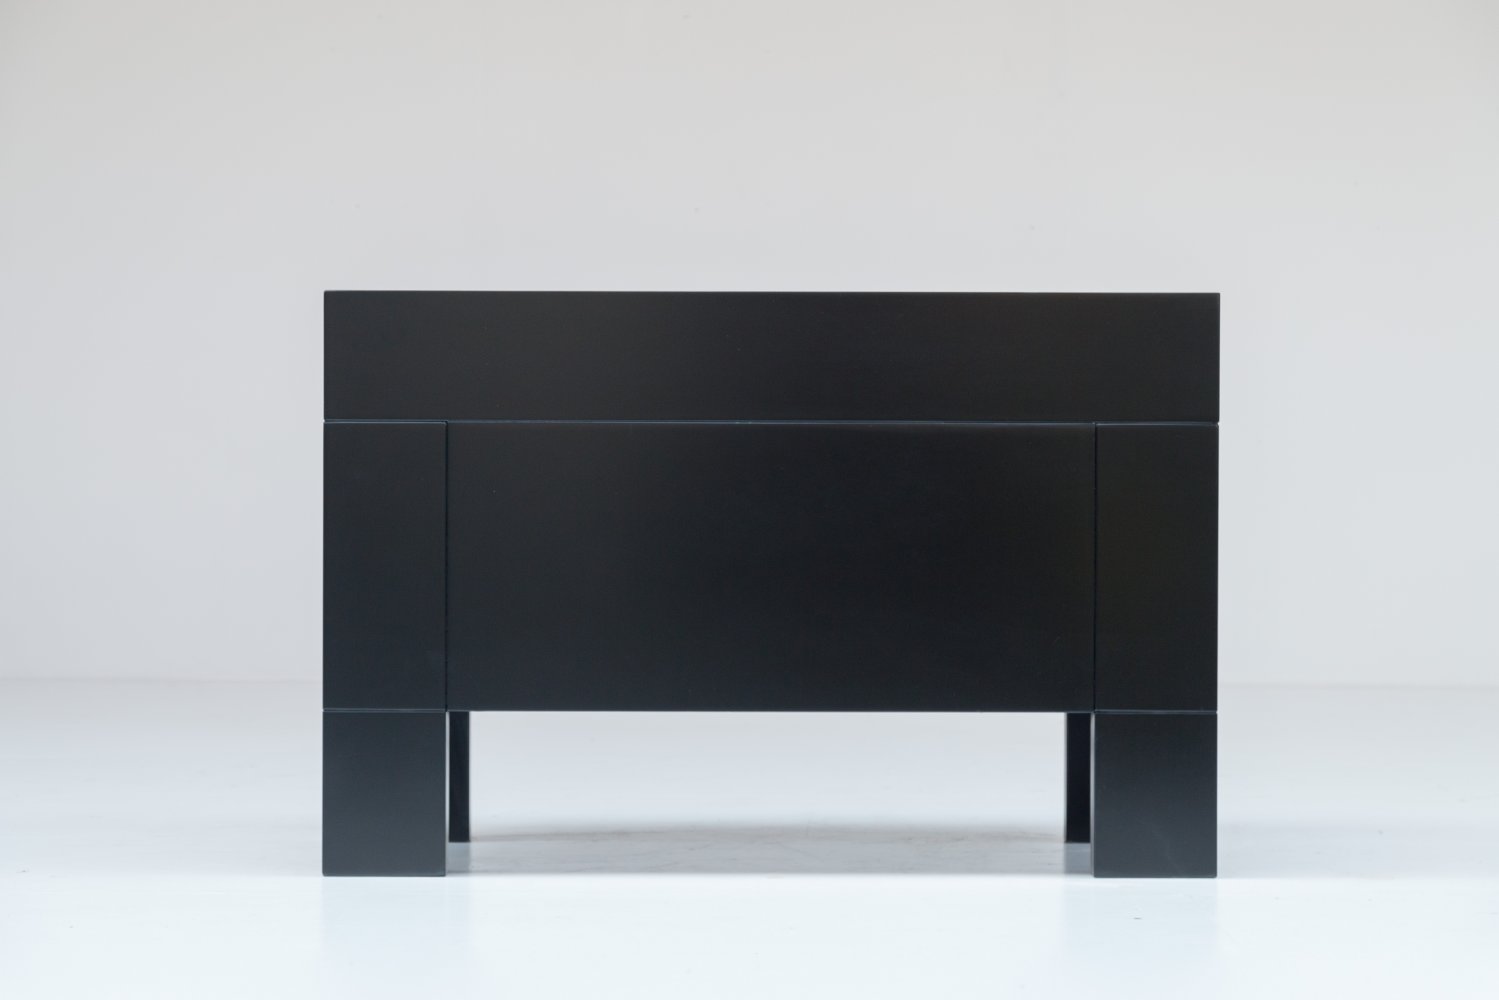 Rare cabinet by Claire Bataille and Paul Ibens for Tspectrum